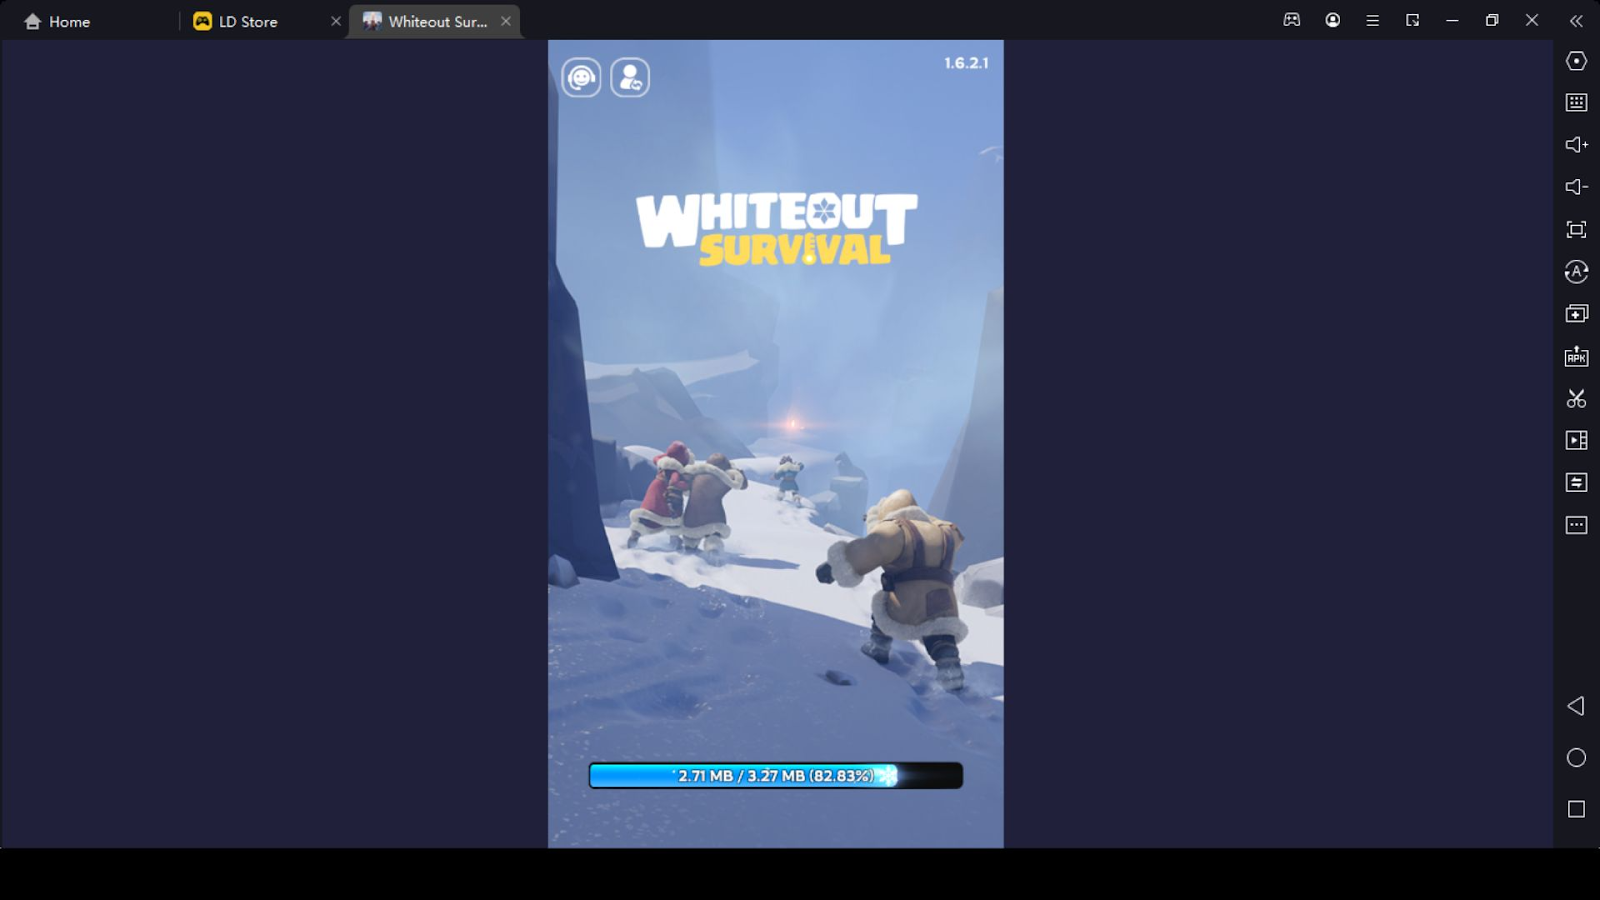 Whiteout Survival Beginner's Guide - The Basic of Survival and